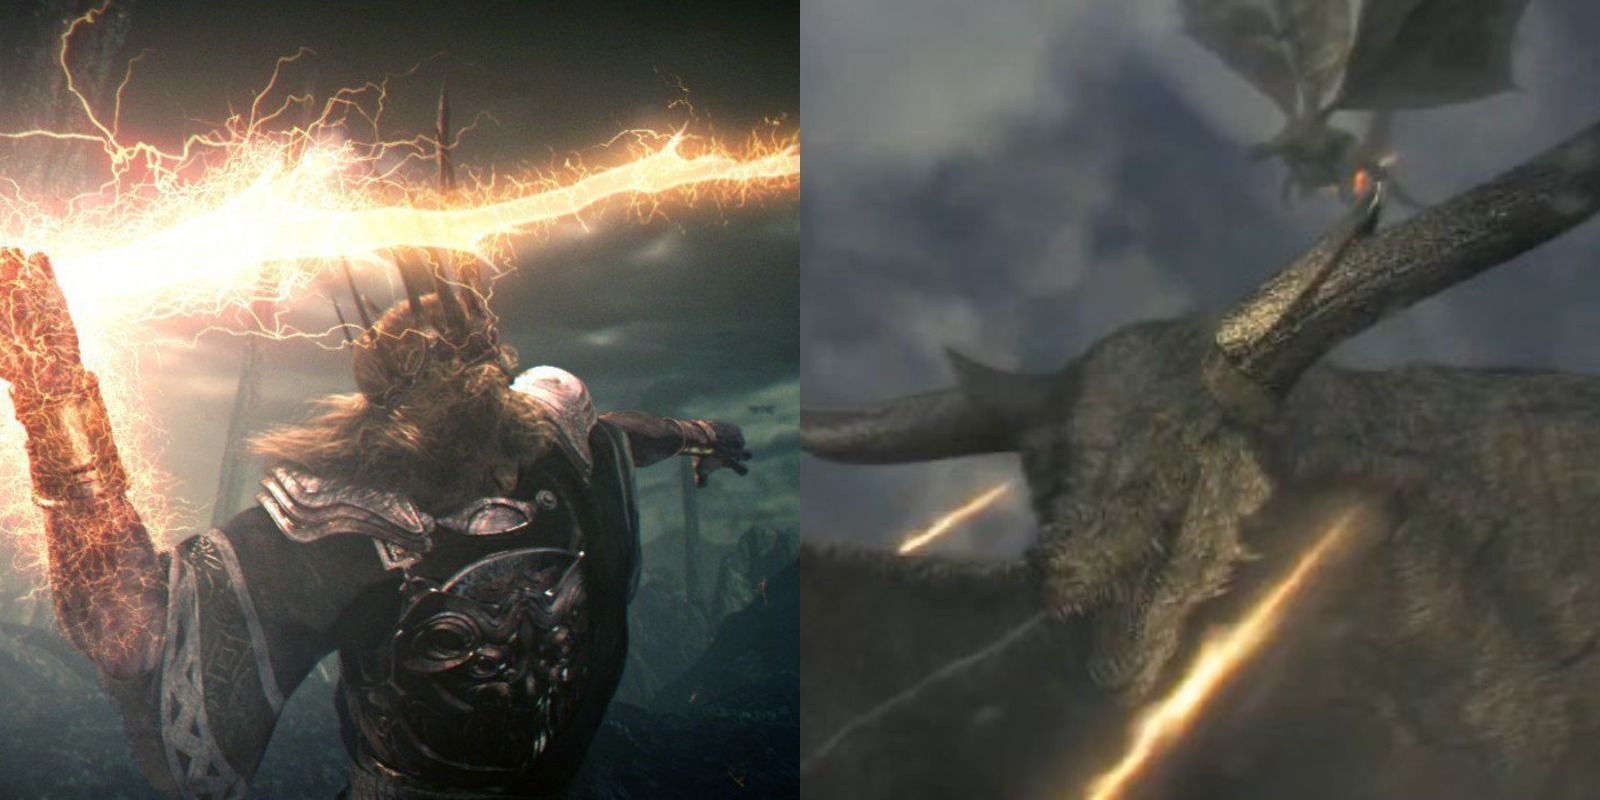 Gwyn throwing lightning spears to defeat the Everlasting Dragons in the Dark Souls prologue.